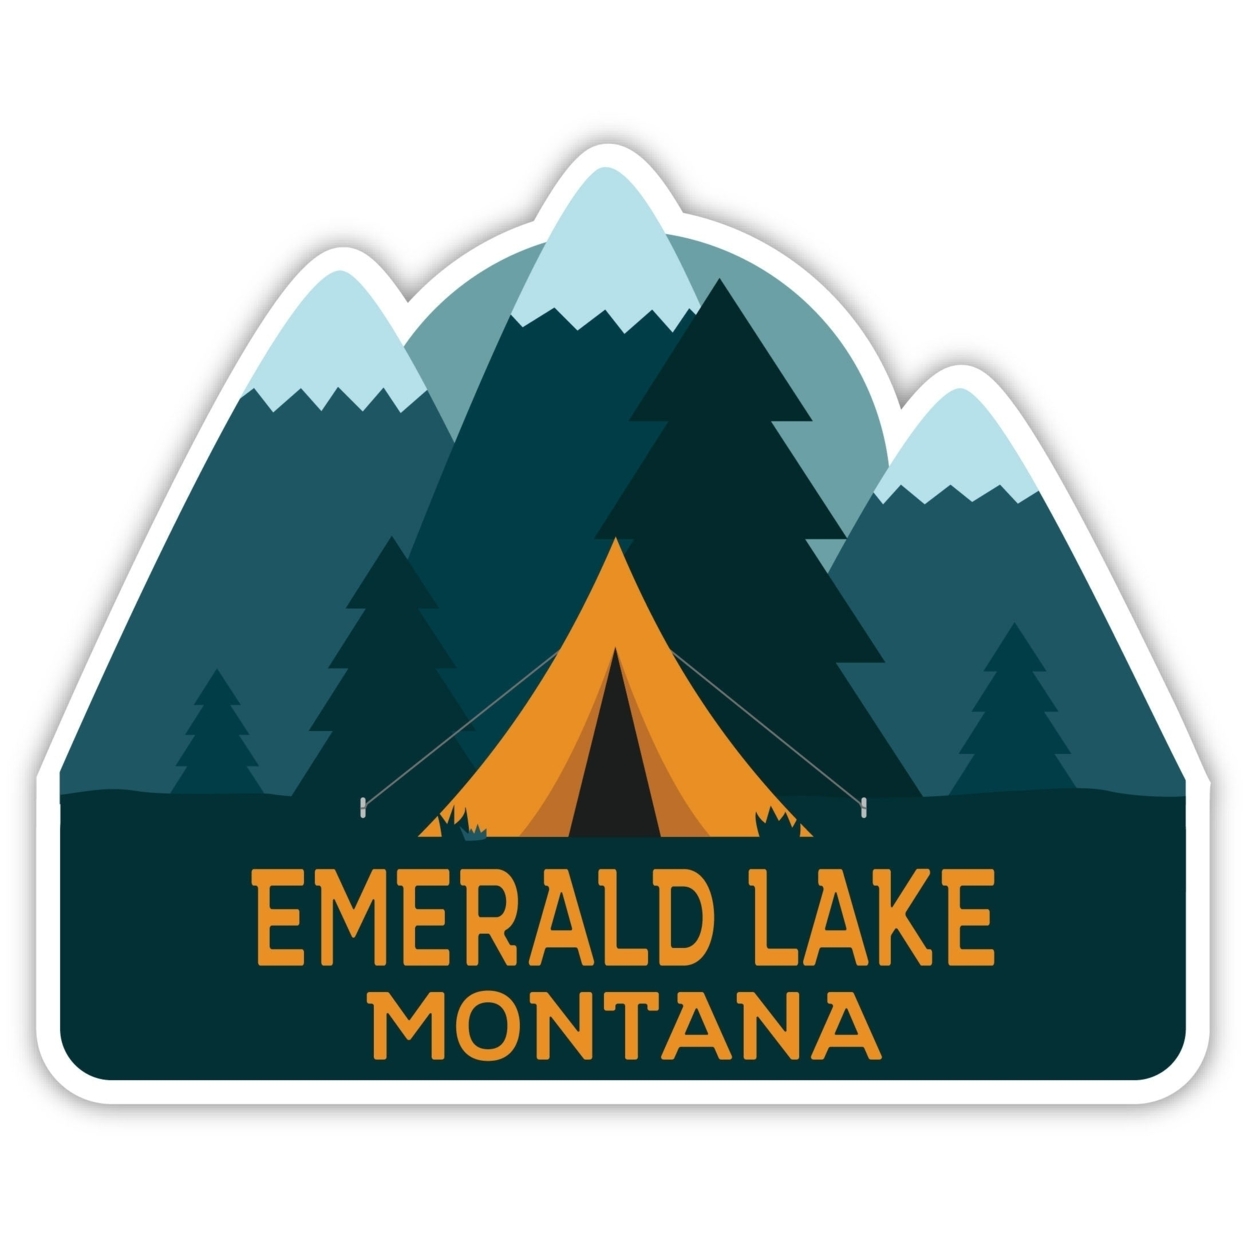 Emerald Lake Montana Souvenir Decorative Stickers (Choose Theme And Size) - 4-Pack, 8-Inch, Tent